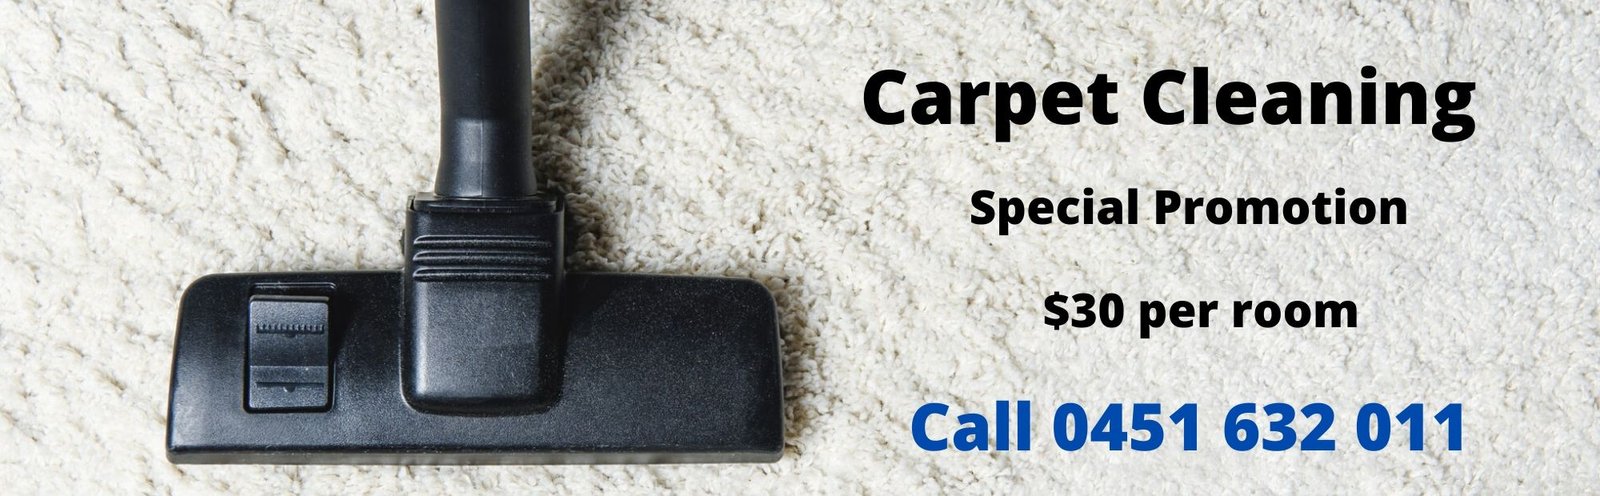 carpet cleaning special price